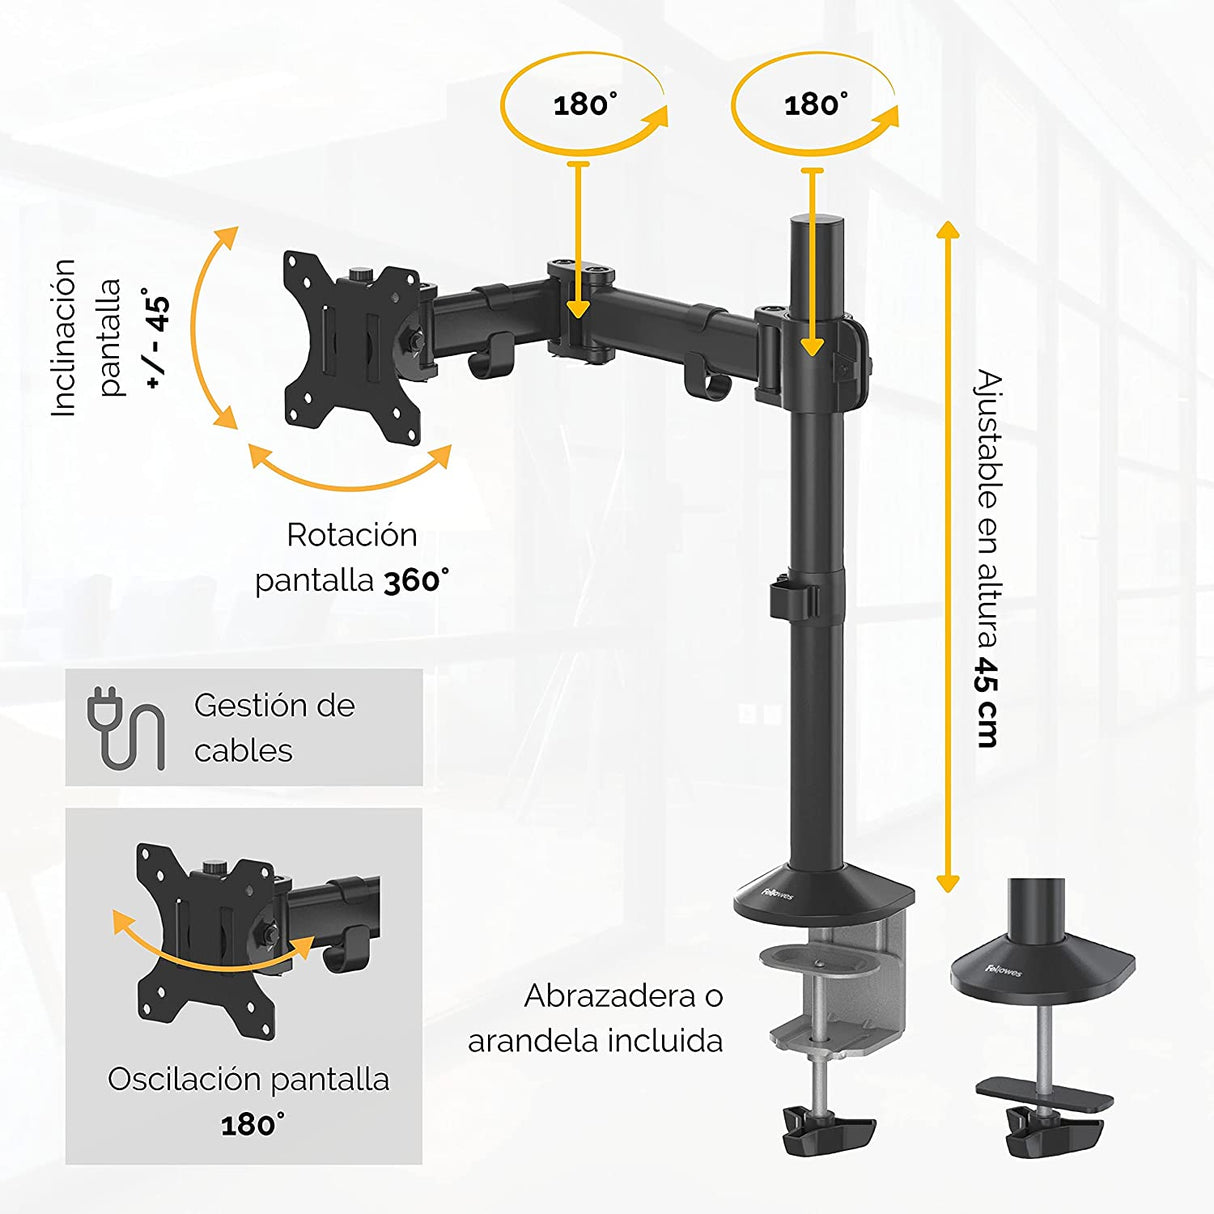 Fellowes Reflex Adjustable Single Monitor Arm, Black, VESA Bracket, Clamp or Grommet Mount, Holds Monitor up to 30” / 24 lbs.